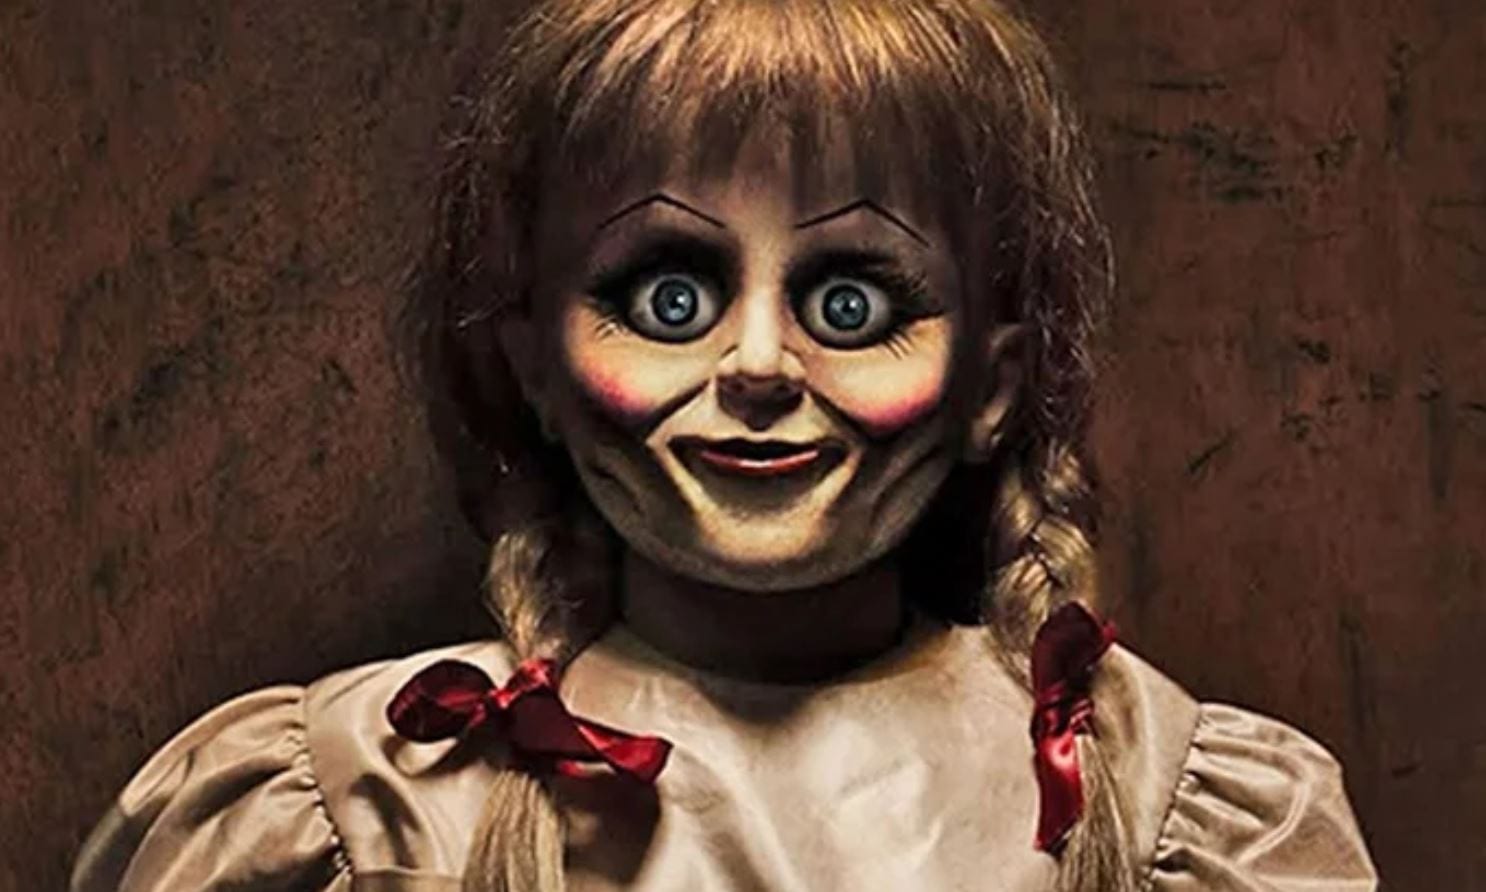 77YearOld Man Dies in Movie Theater While Watching ‘Annabelle Comes